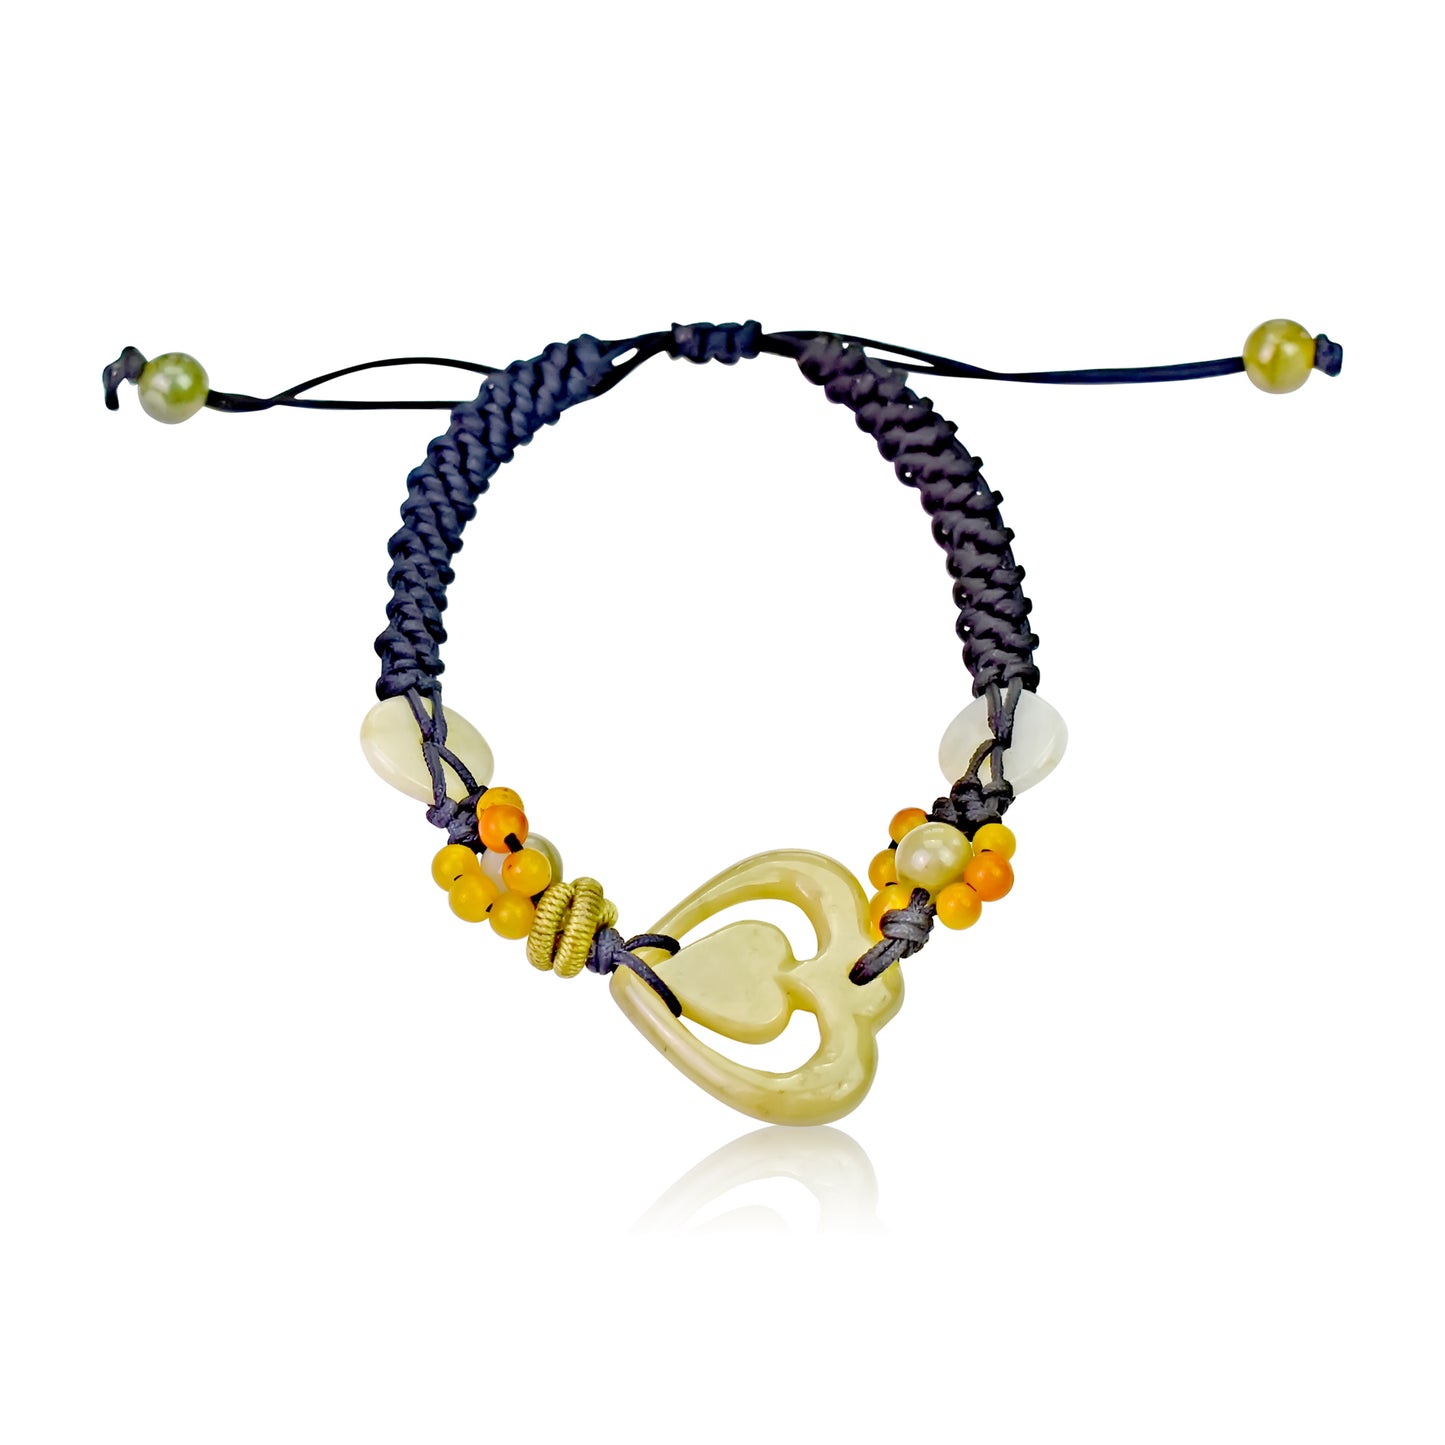 Get Ready for Love with the Heart Honey Jade Bracelet made with Black Cord